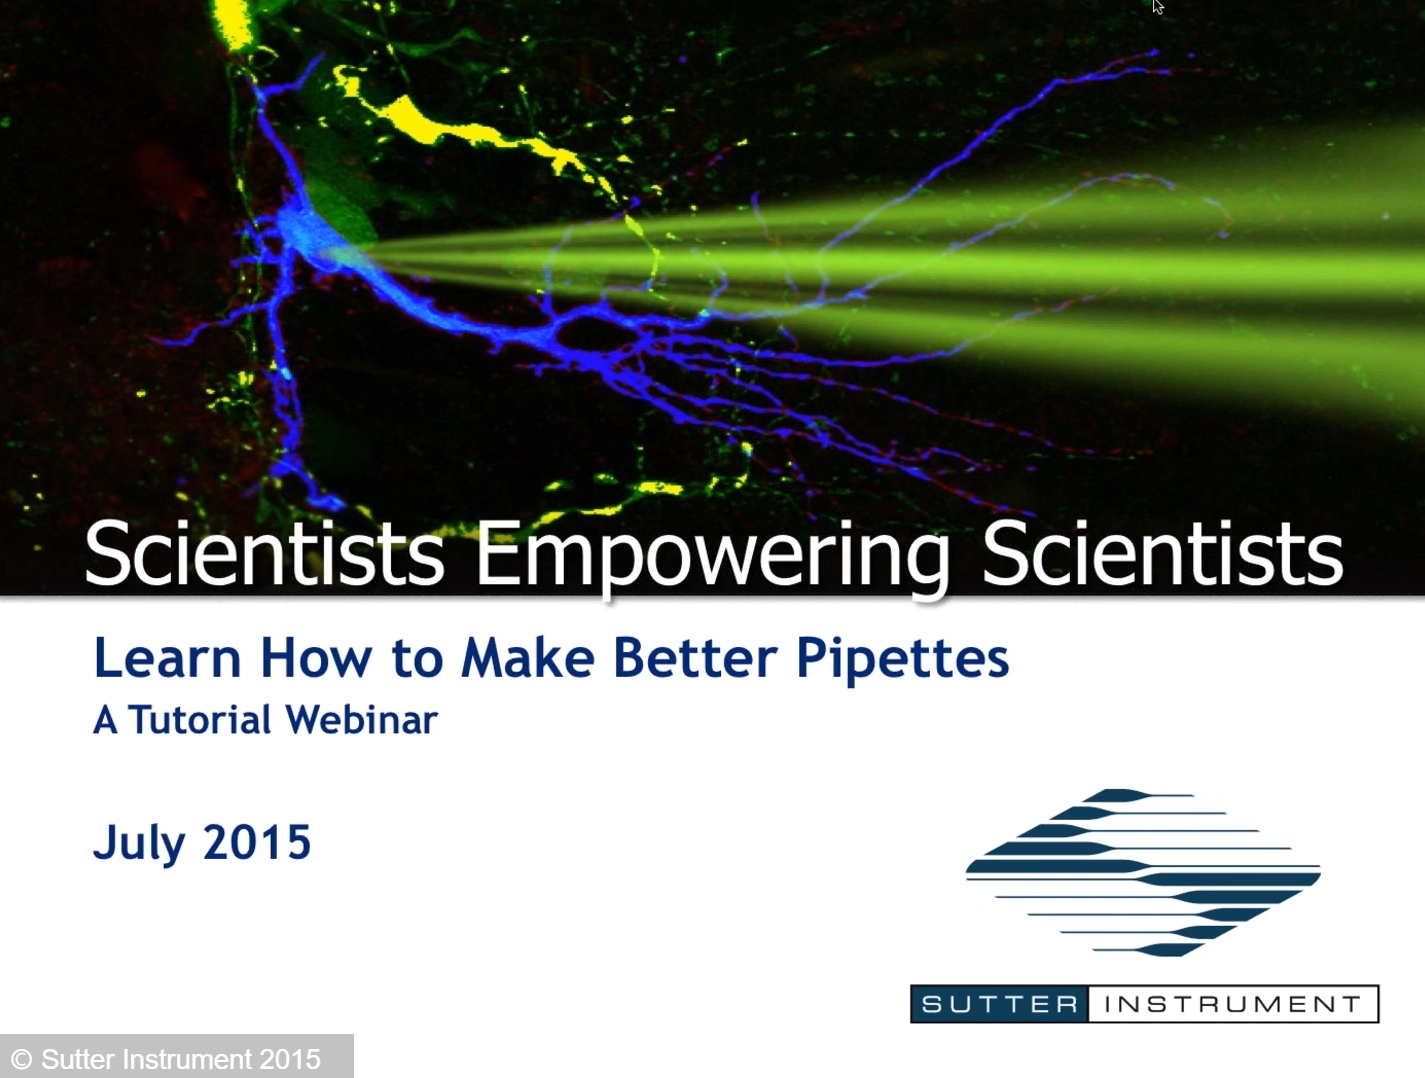 How To Make Better Pipettes-Scientists Empowering Scientists